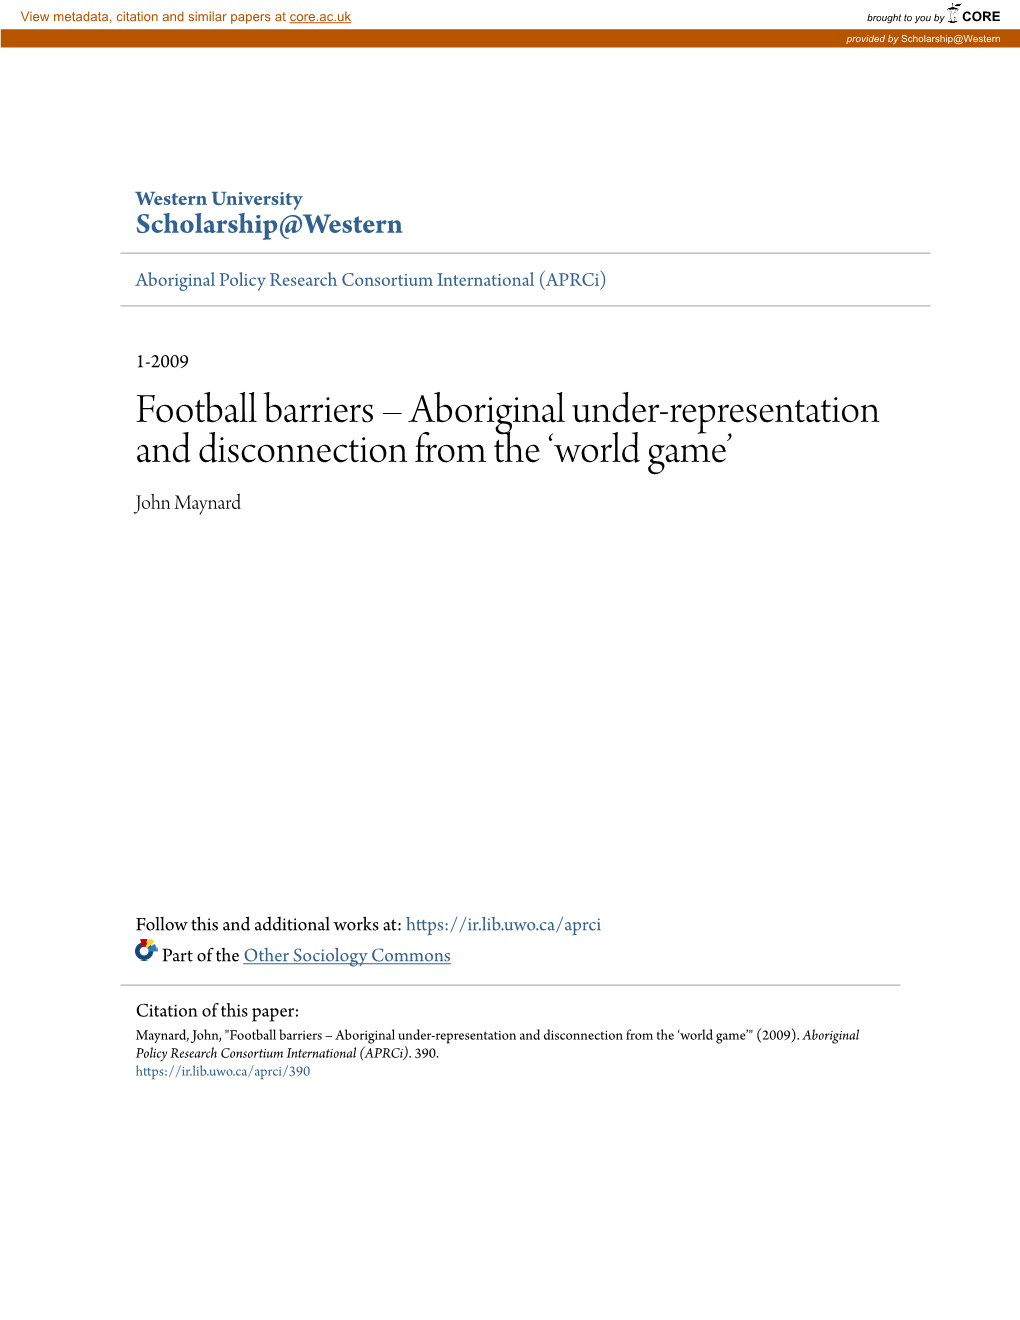 Football Barriers – Aboriginal Under‐Representation and Disconnection from the ‘World Game’ John Maynard